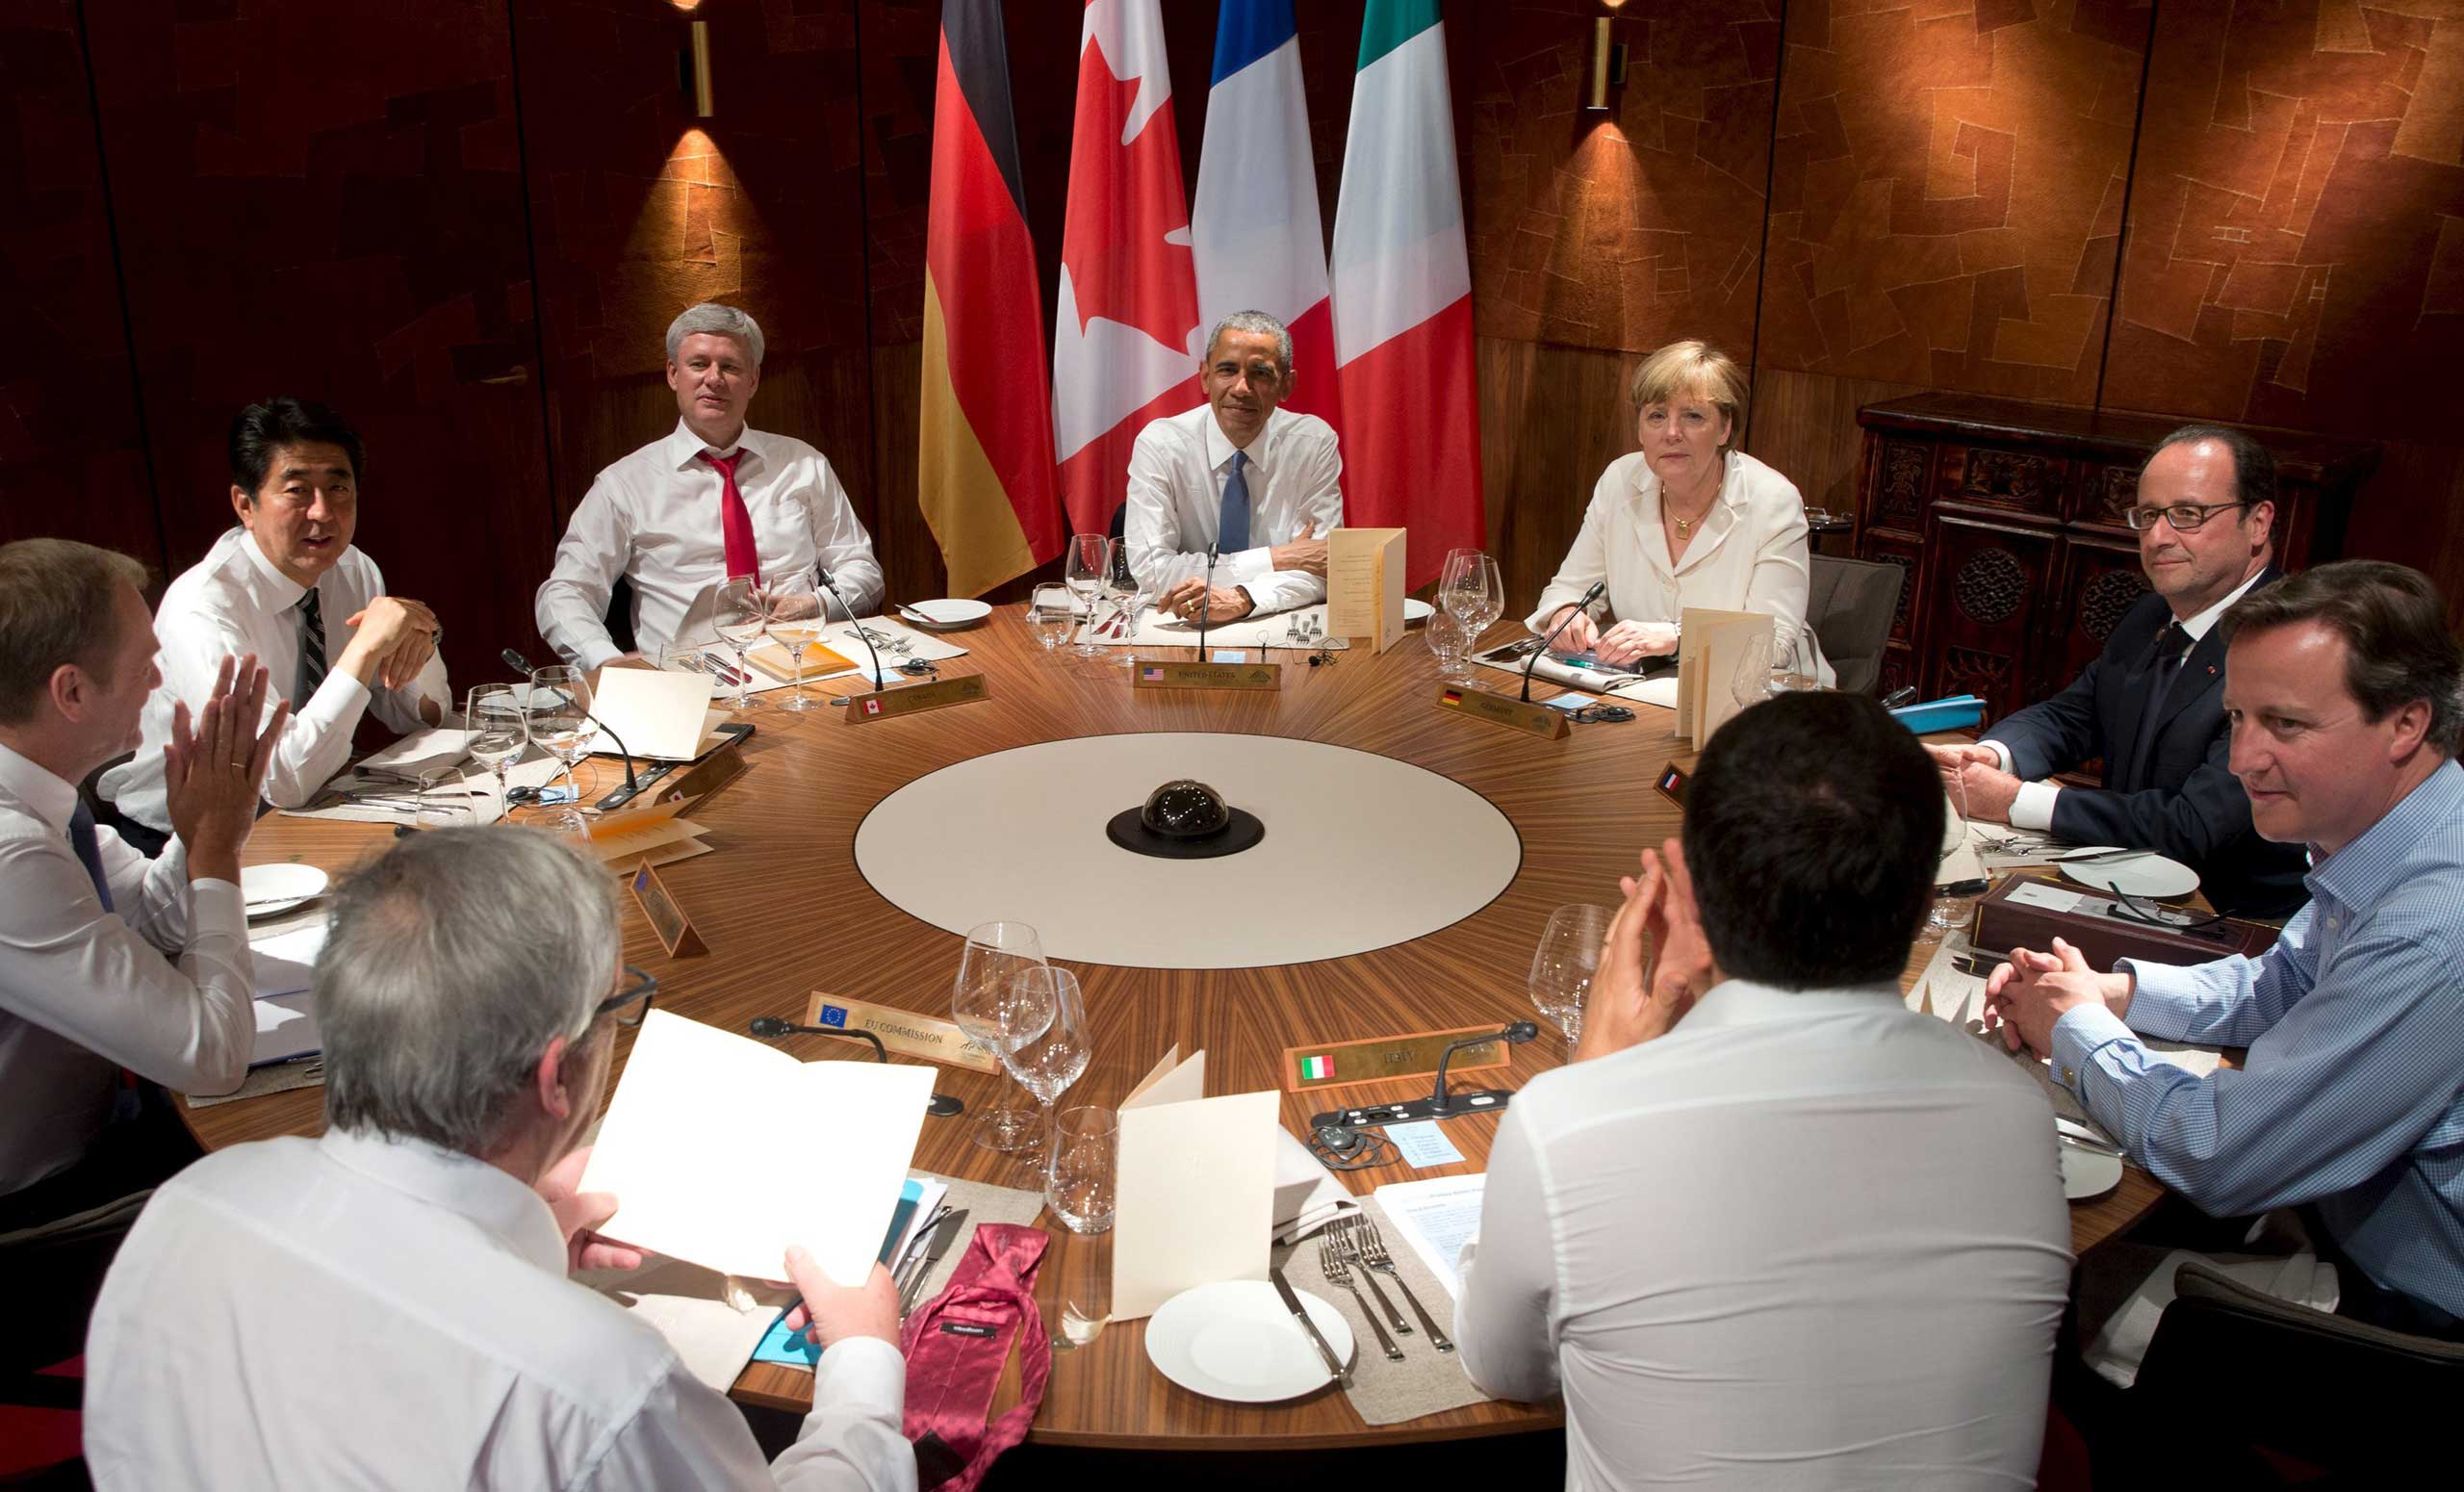 Working dinner of the G7 Summit in Germany